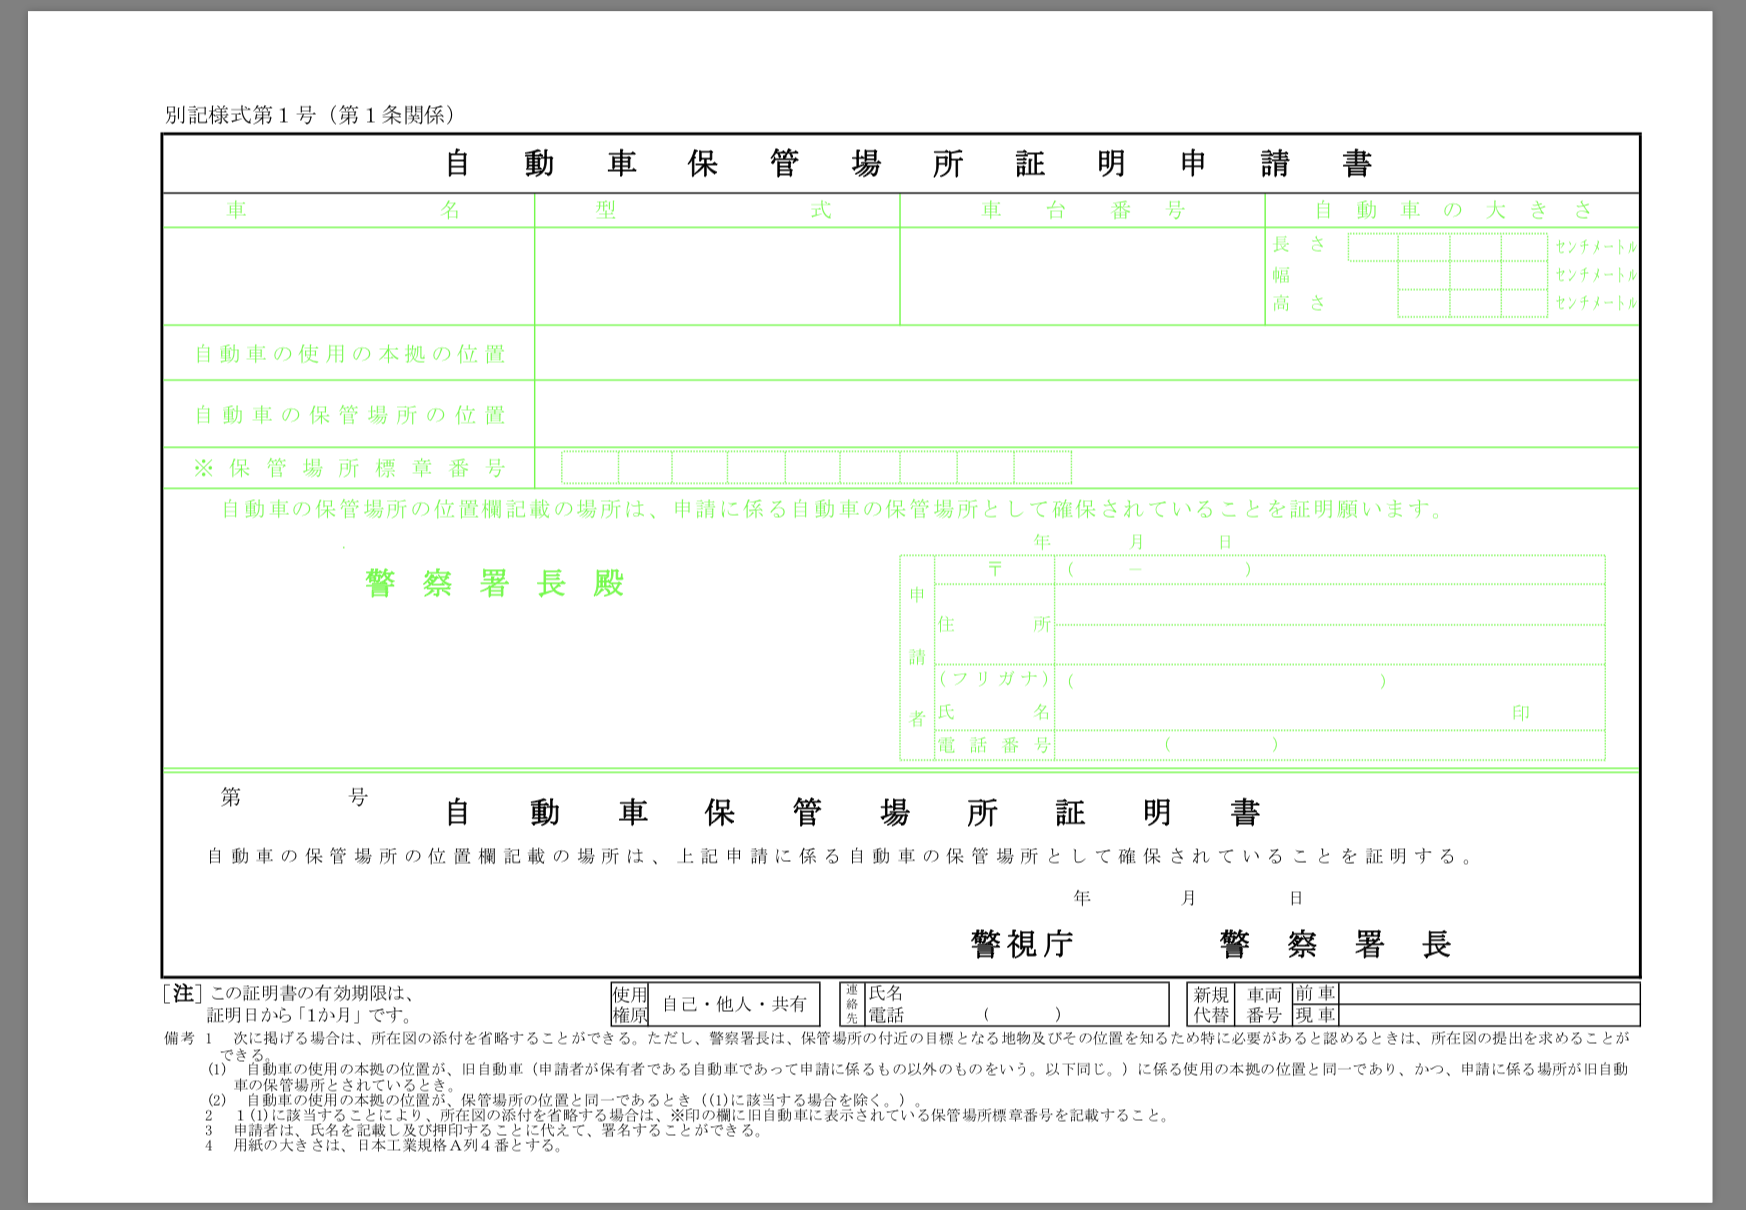 How to get a garage certificate “Shakoshoumei” (車庫証明) in Japan.  Explain 4 application forms to submit to a police station